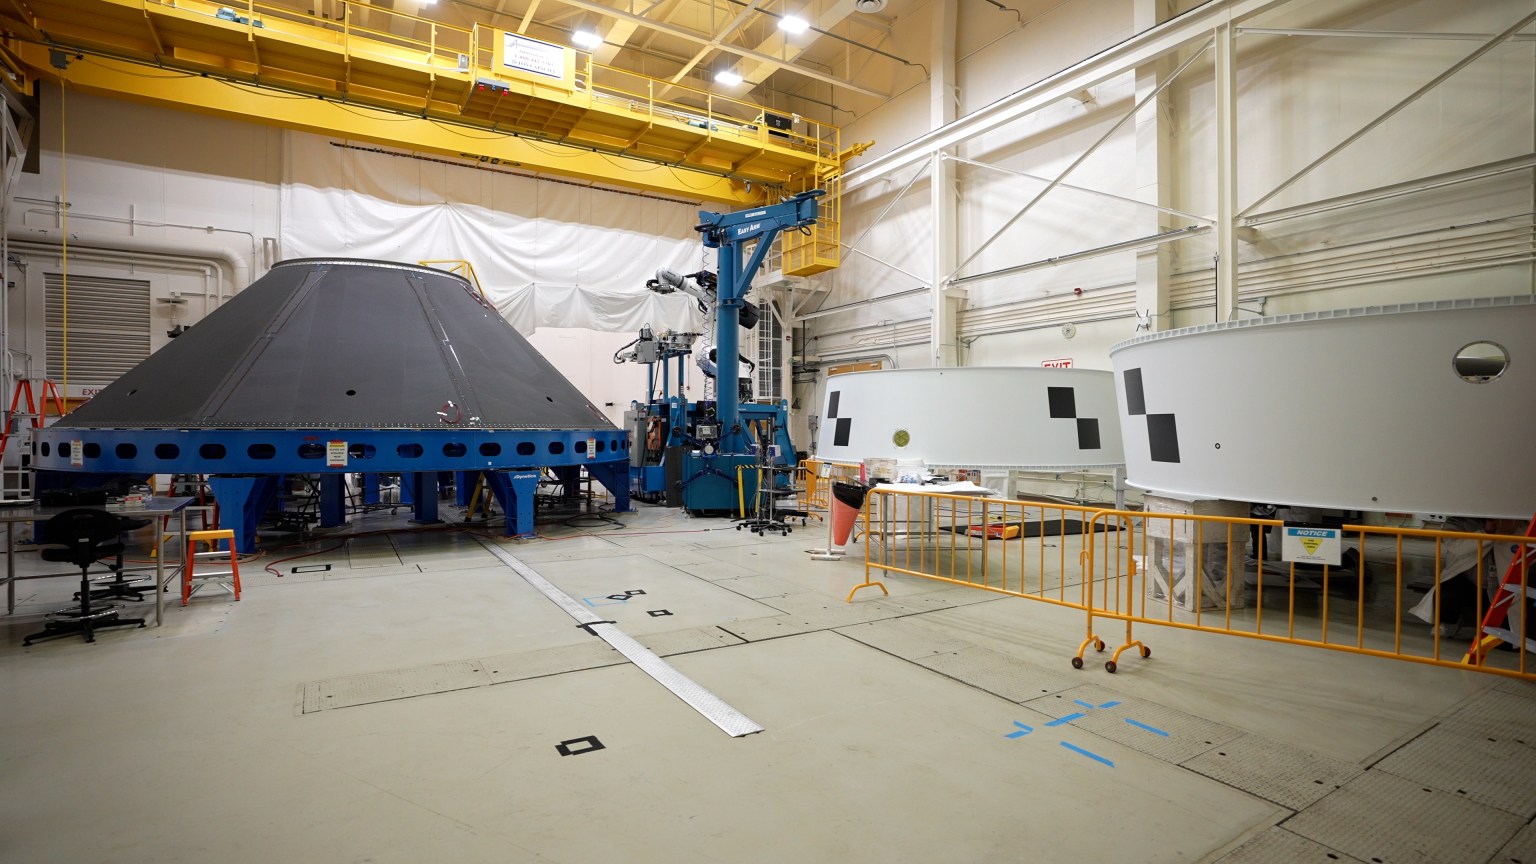 Key adapters for the first crewed Artemis missions are manufactured at NASA's Marshall Space Flight Center in Huntsville, Alabama. The cone-shaped payload adapter, left, will debut on the Block 1B configuration of the SLS rocket beginning with Artemis IV, while the Orion stage adapters, right, will be used for Artemis II and Artemis III.